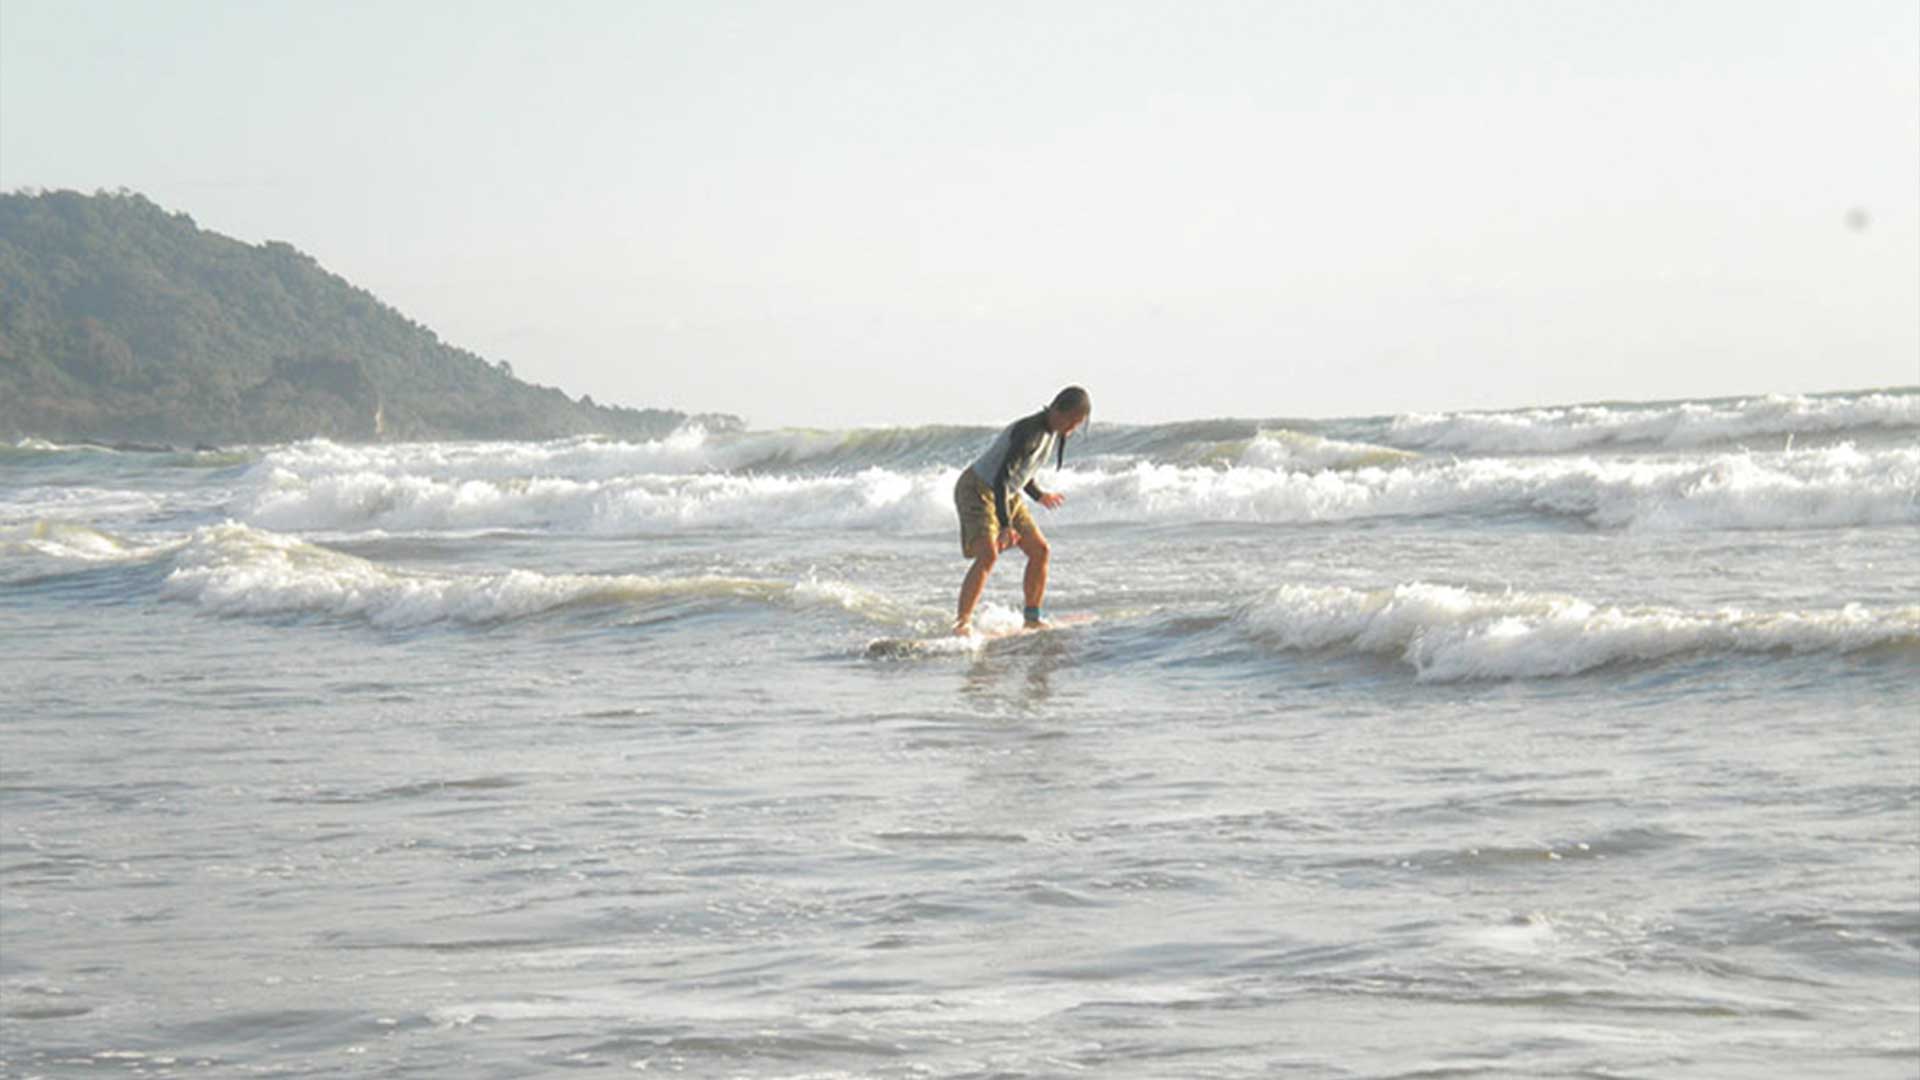 A beginner surfer learning how to surf whitewater waves during lesson at Playa Grande, Costa Rica